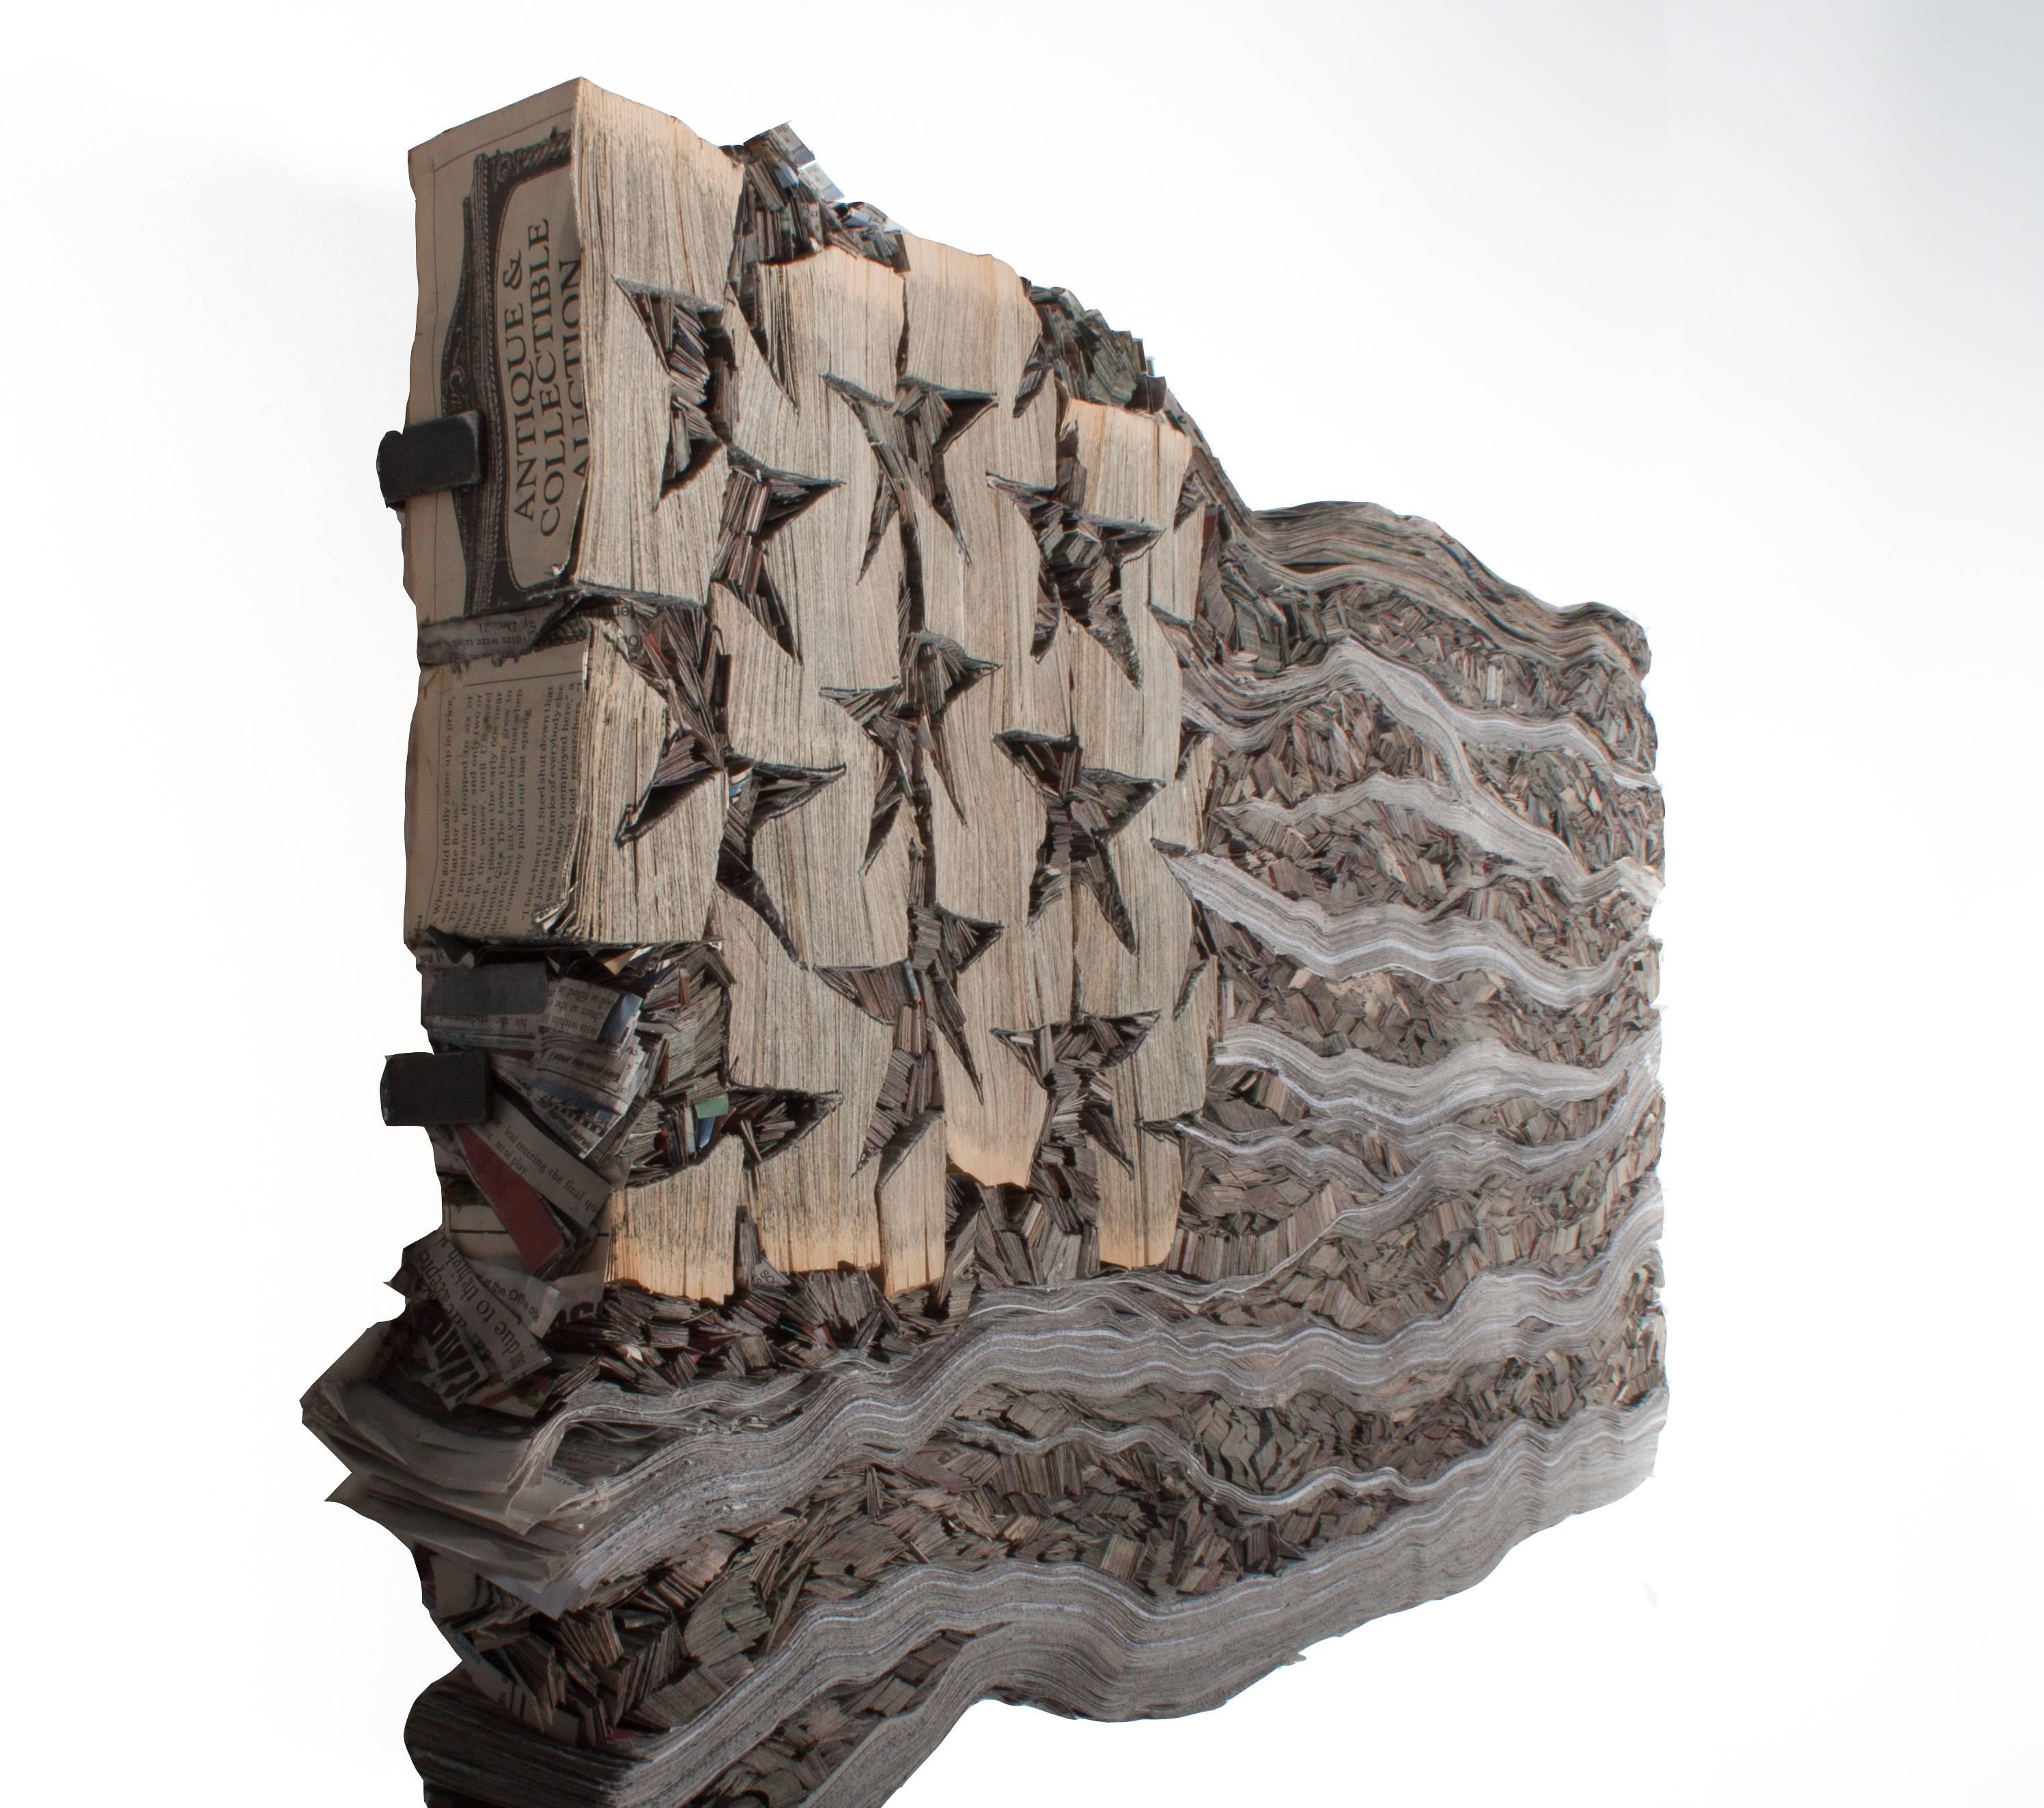 The Congressional Record - Sculpture by Kate Hunt